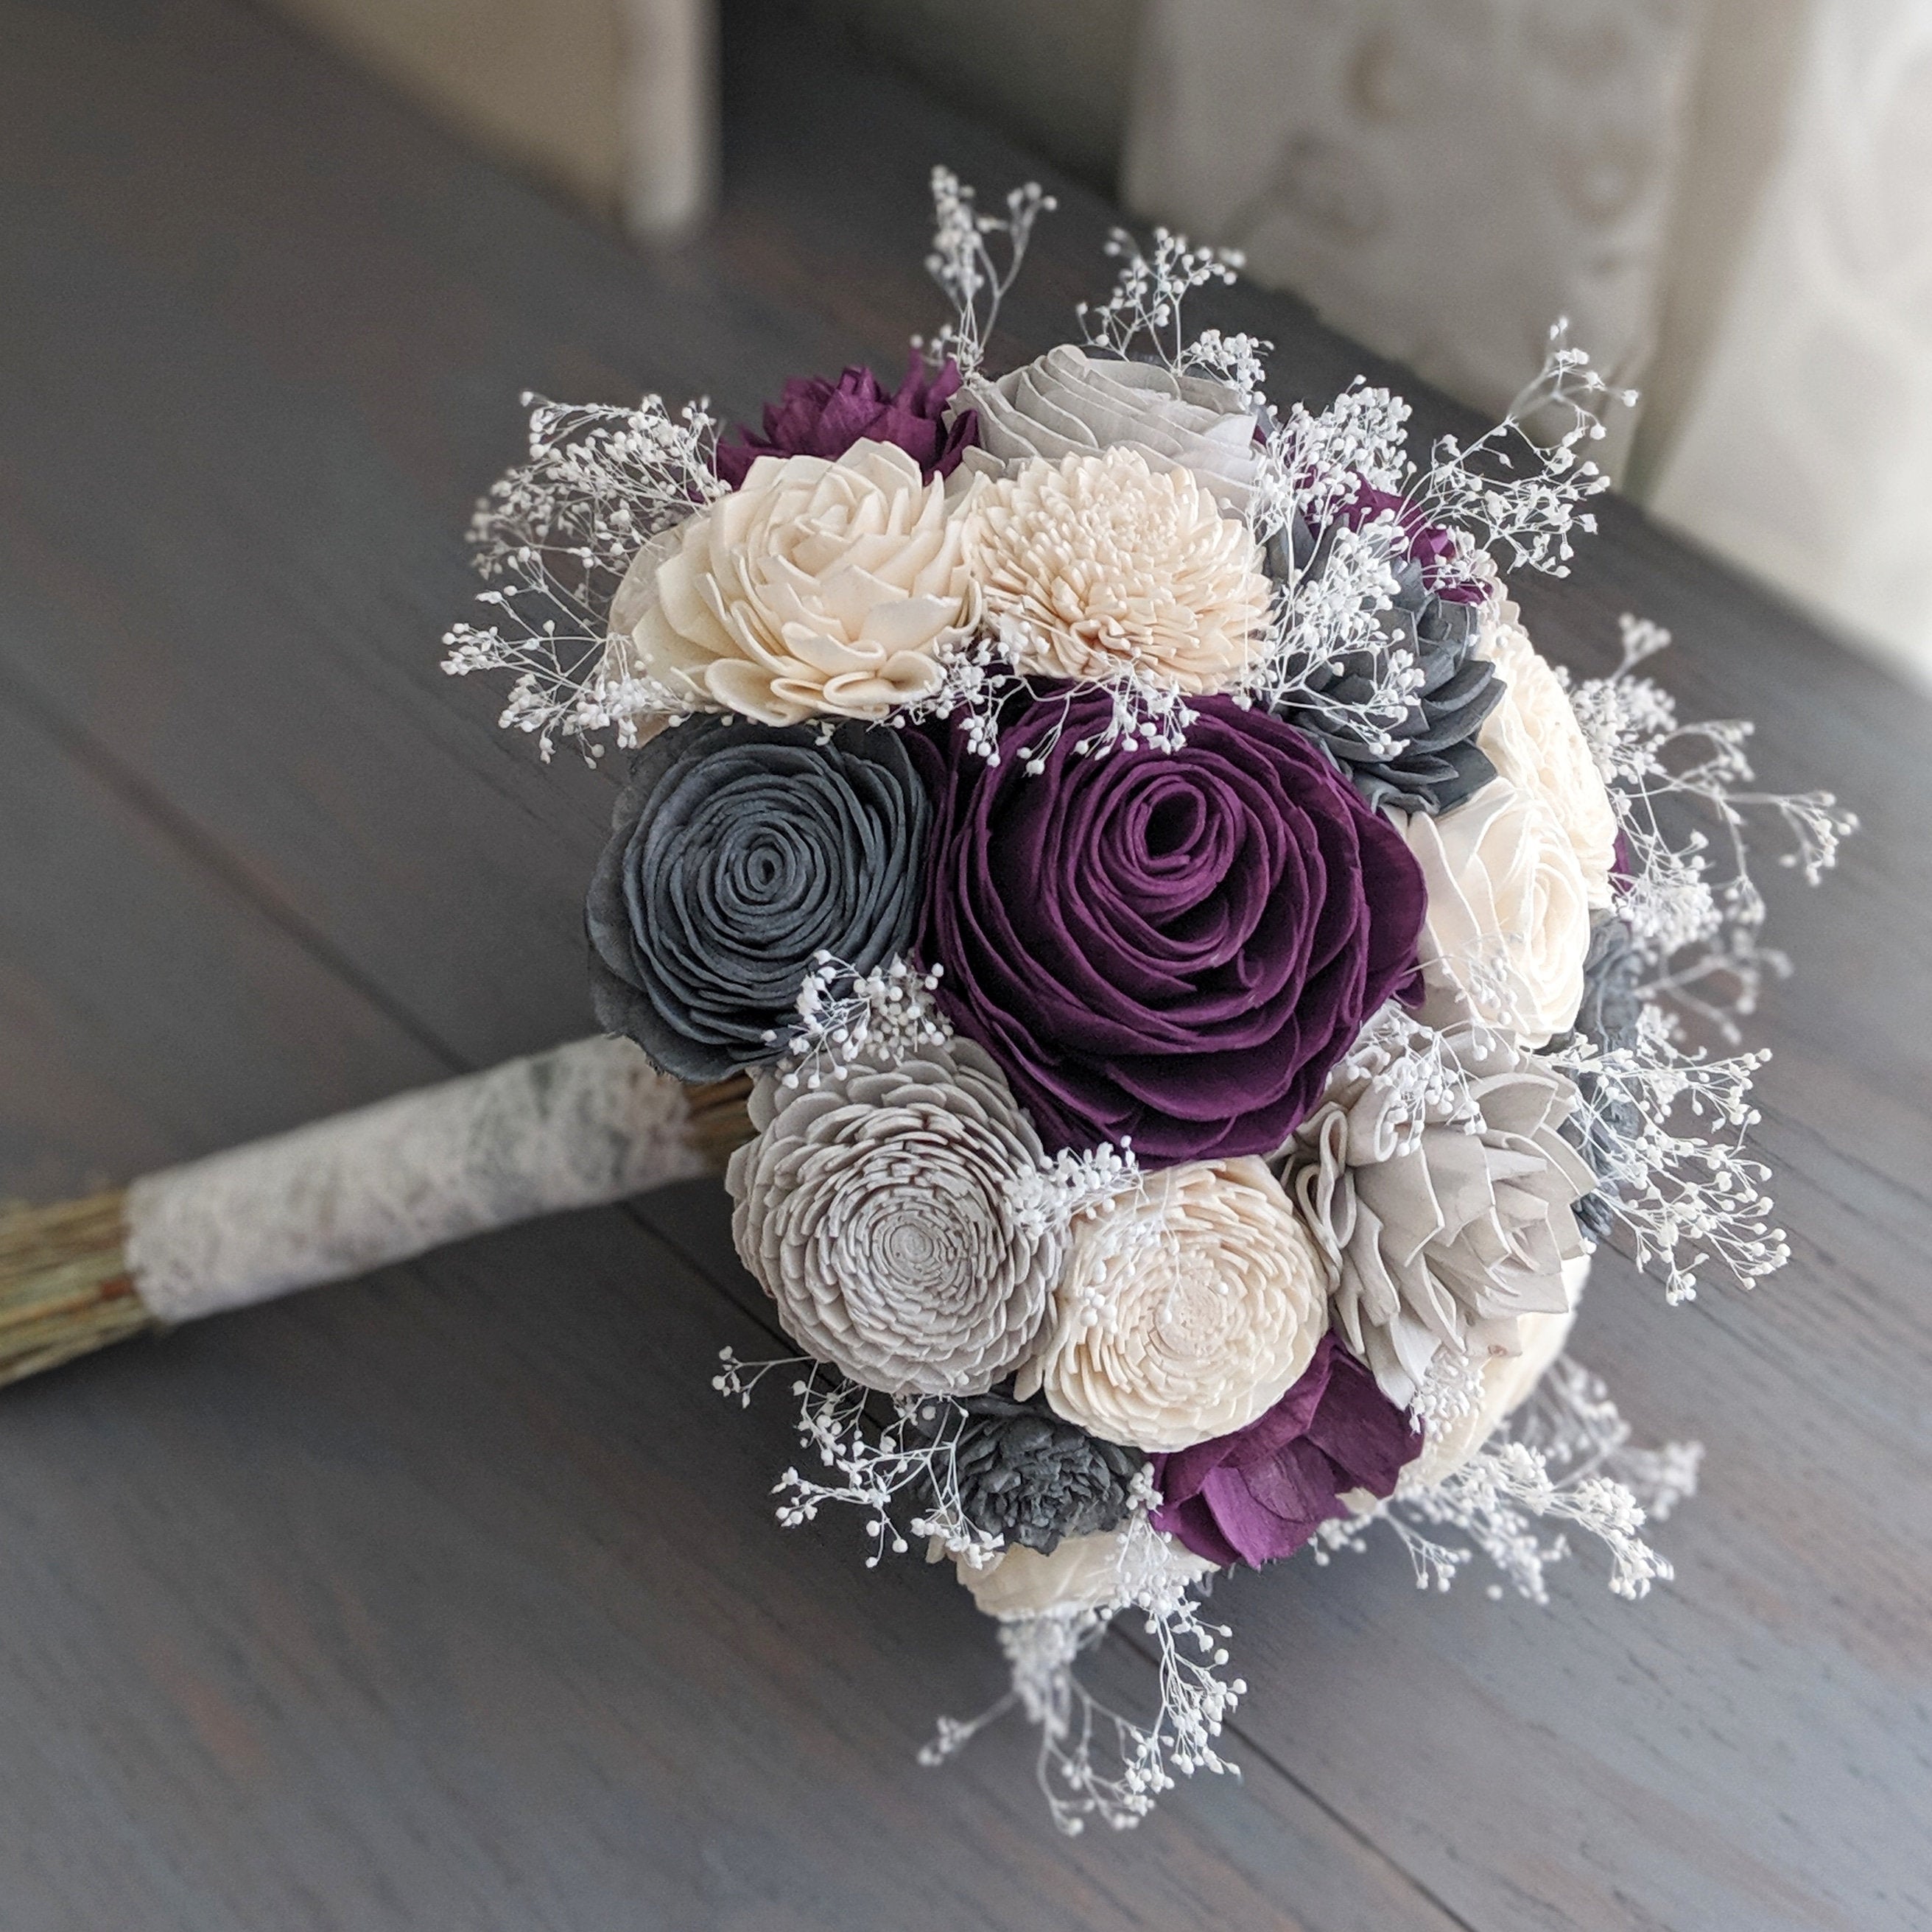 Plum, Burgundy, Light Gray, and Ivory Bouquet with Greenery – Secondhand  Stardust